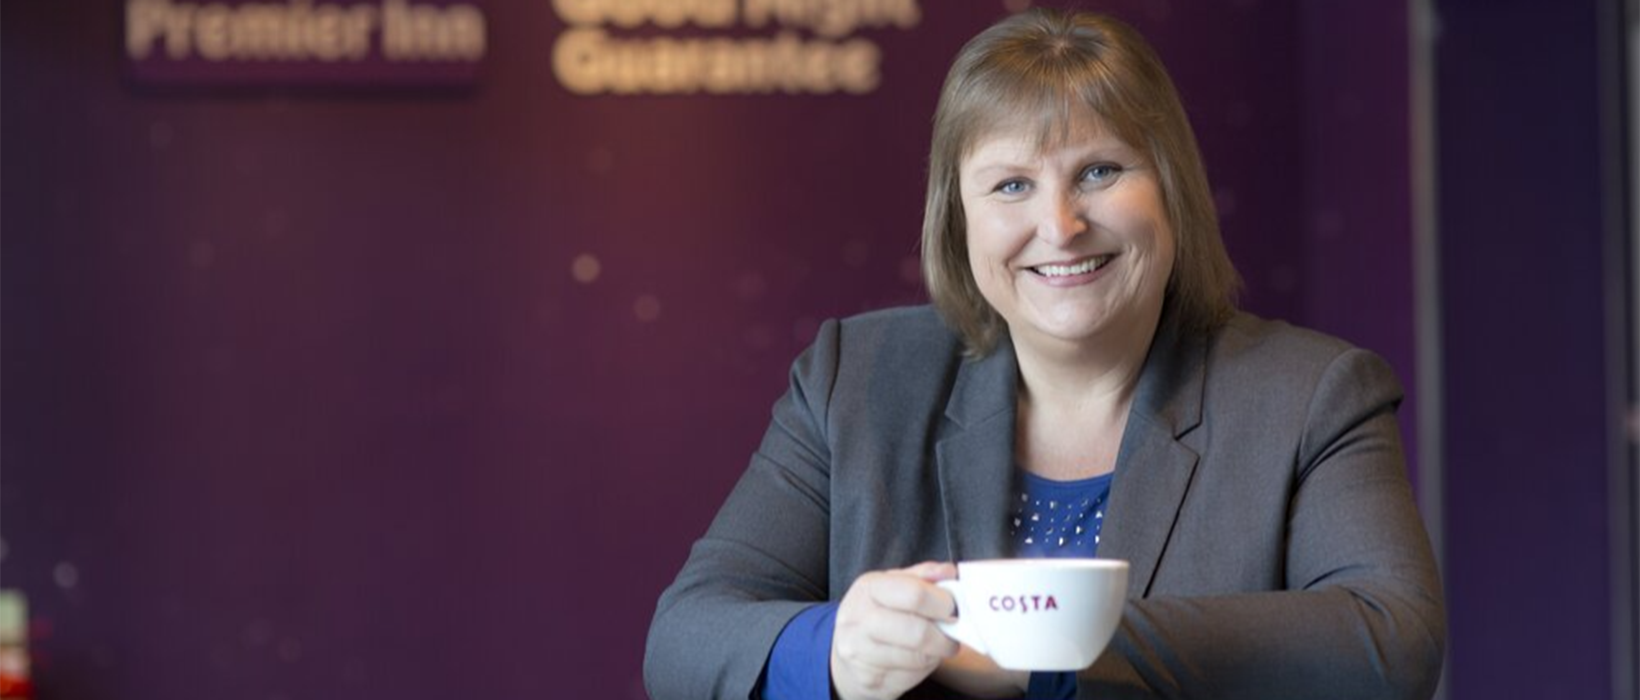 Premier Inn accommodation sales ‘significantly’ ahead of last year and pre-pandemic